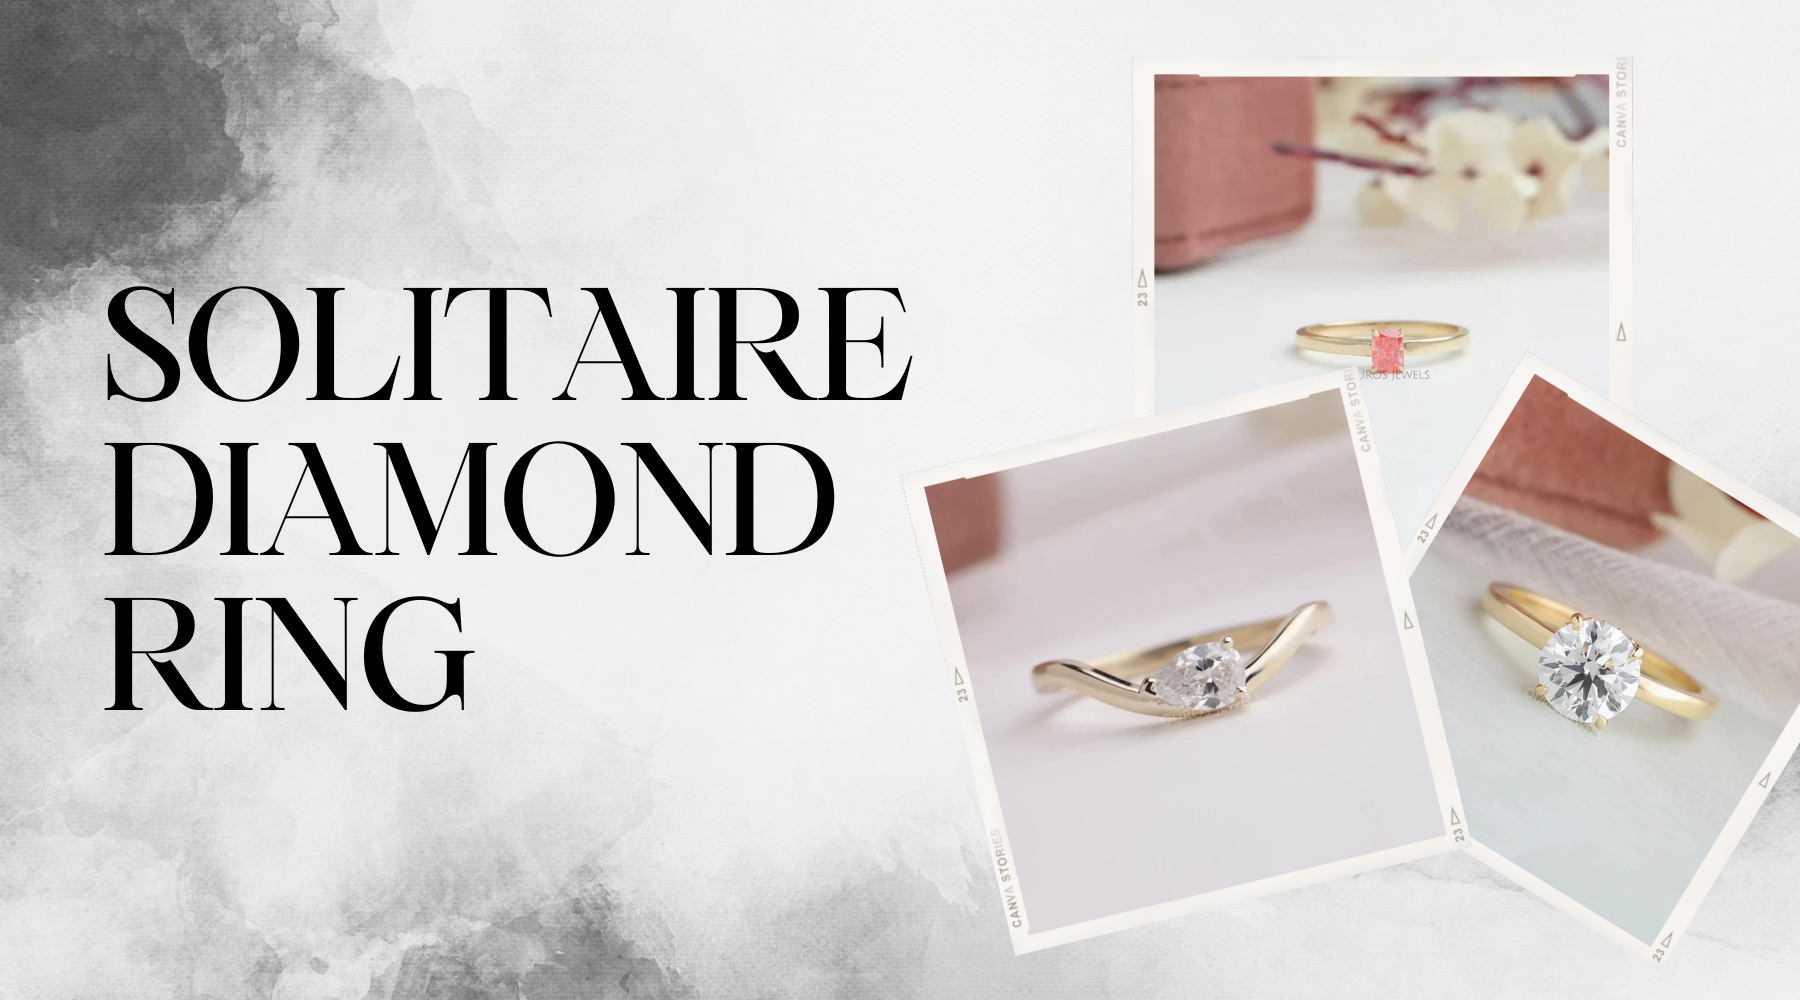 What defines the Diamond Solitaire Ring?